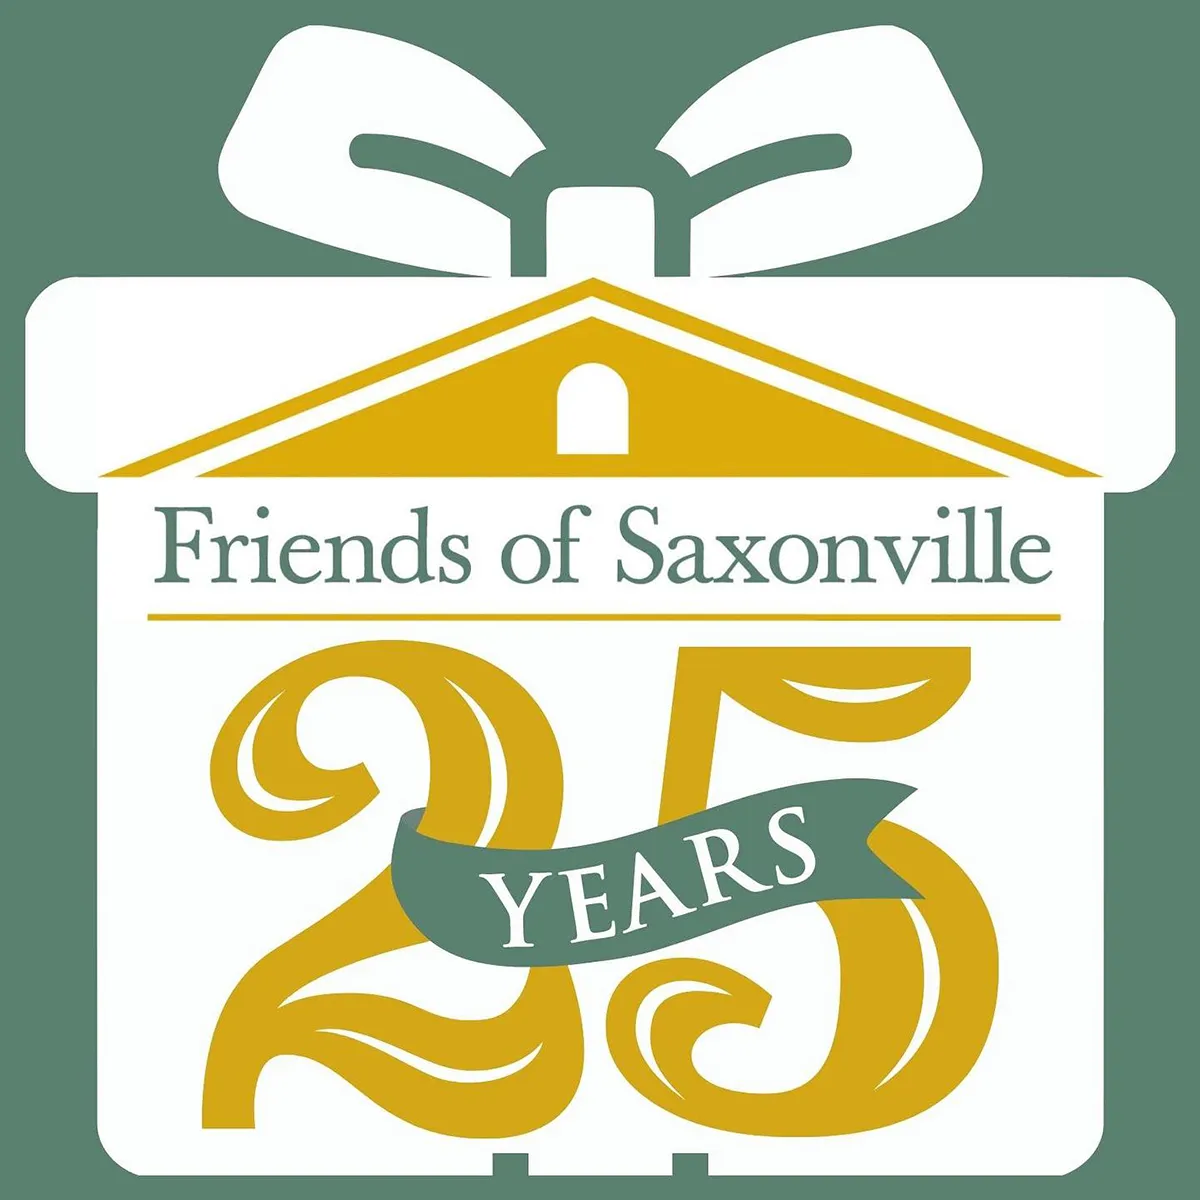 Friends of Saxonville 25 Years logo